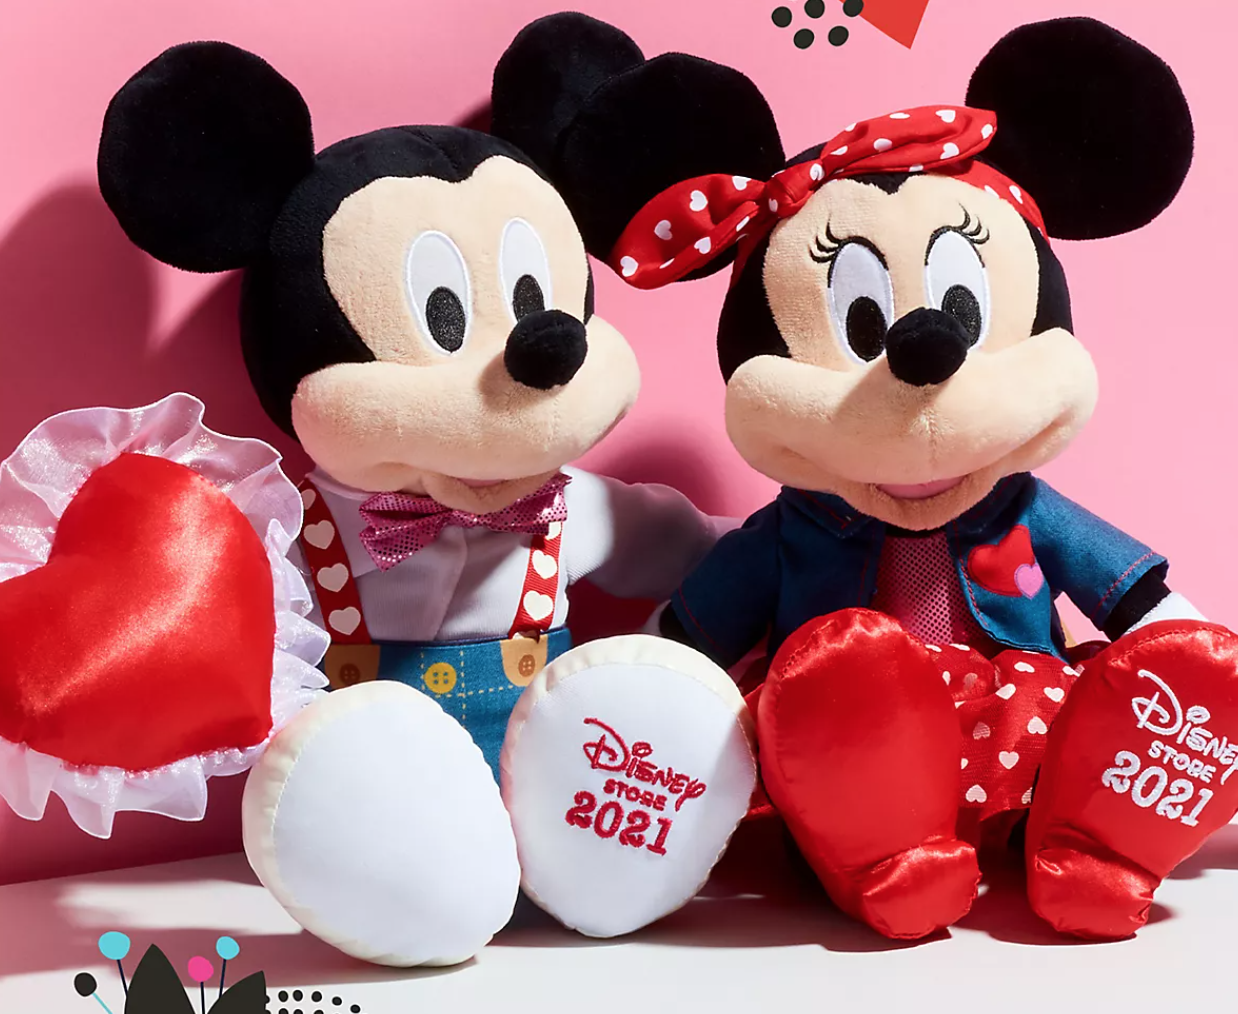 Disney Minnie and Mickey Mouse Bean Plush Dolls Valentine in Bag for sale online 